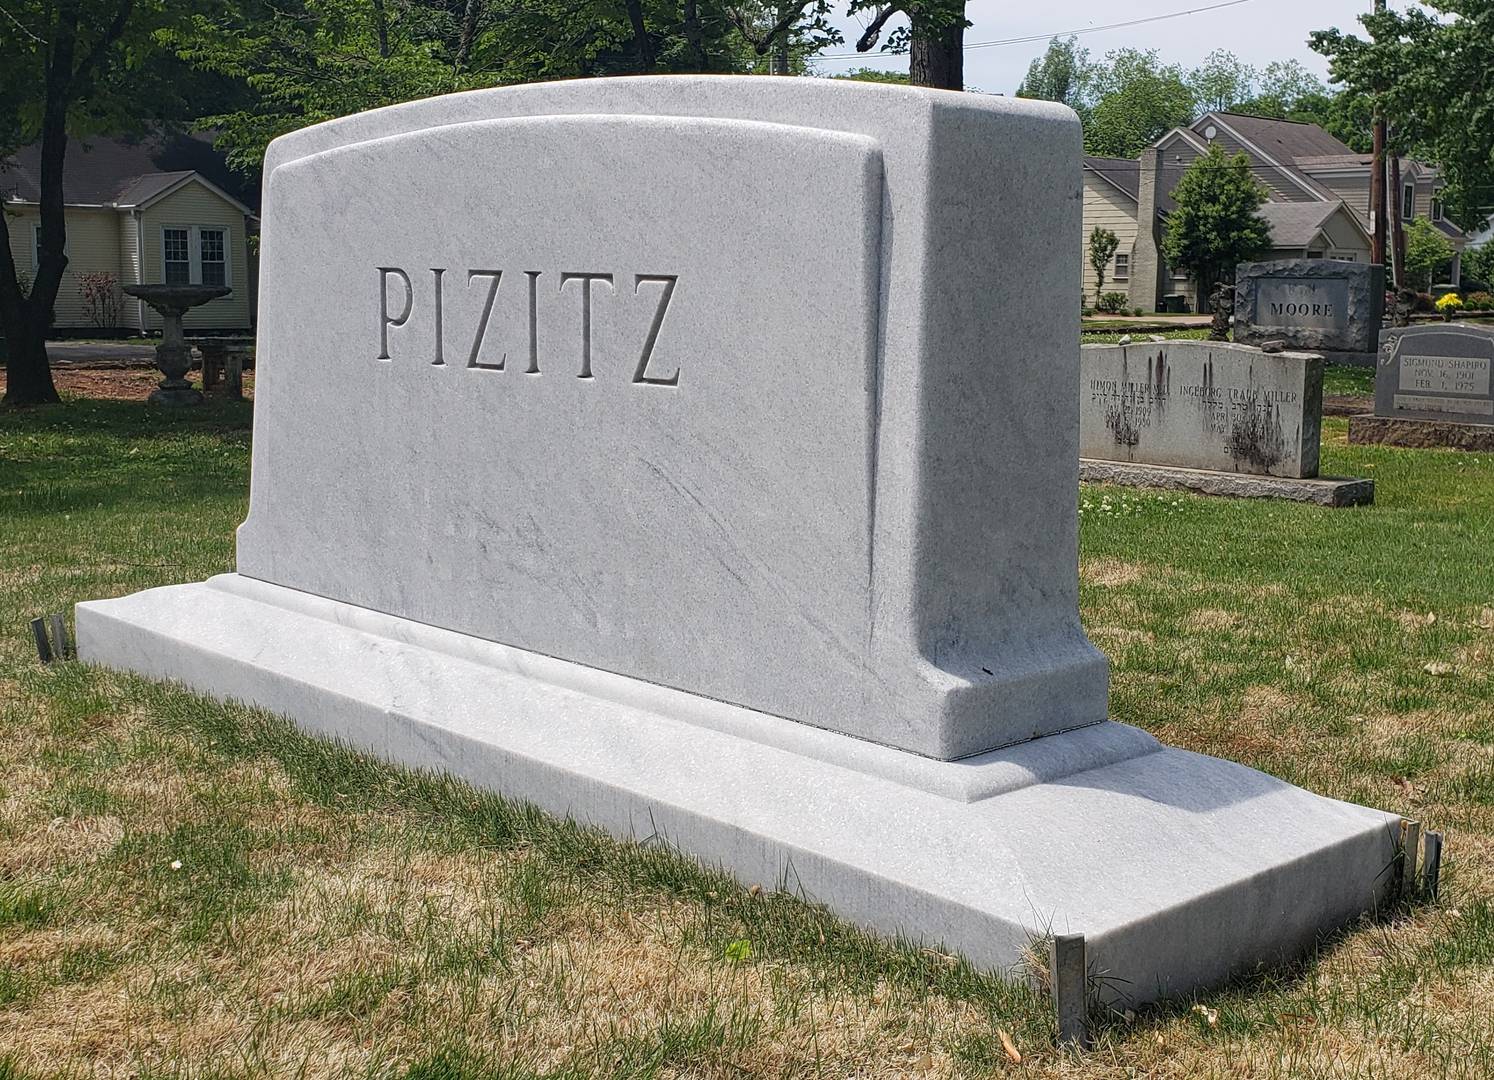 A memorial slab with the name and illustration by the text Pizitz